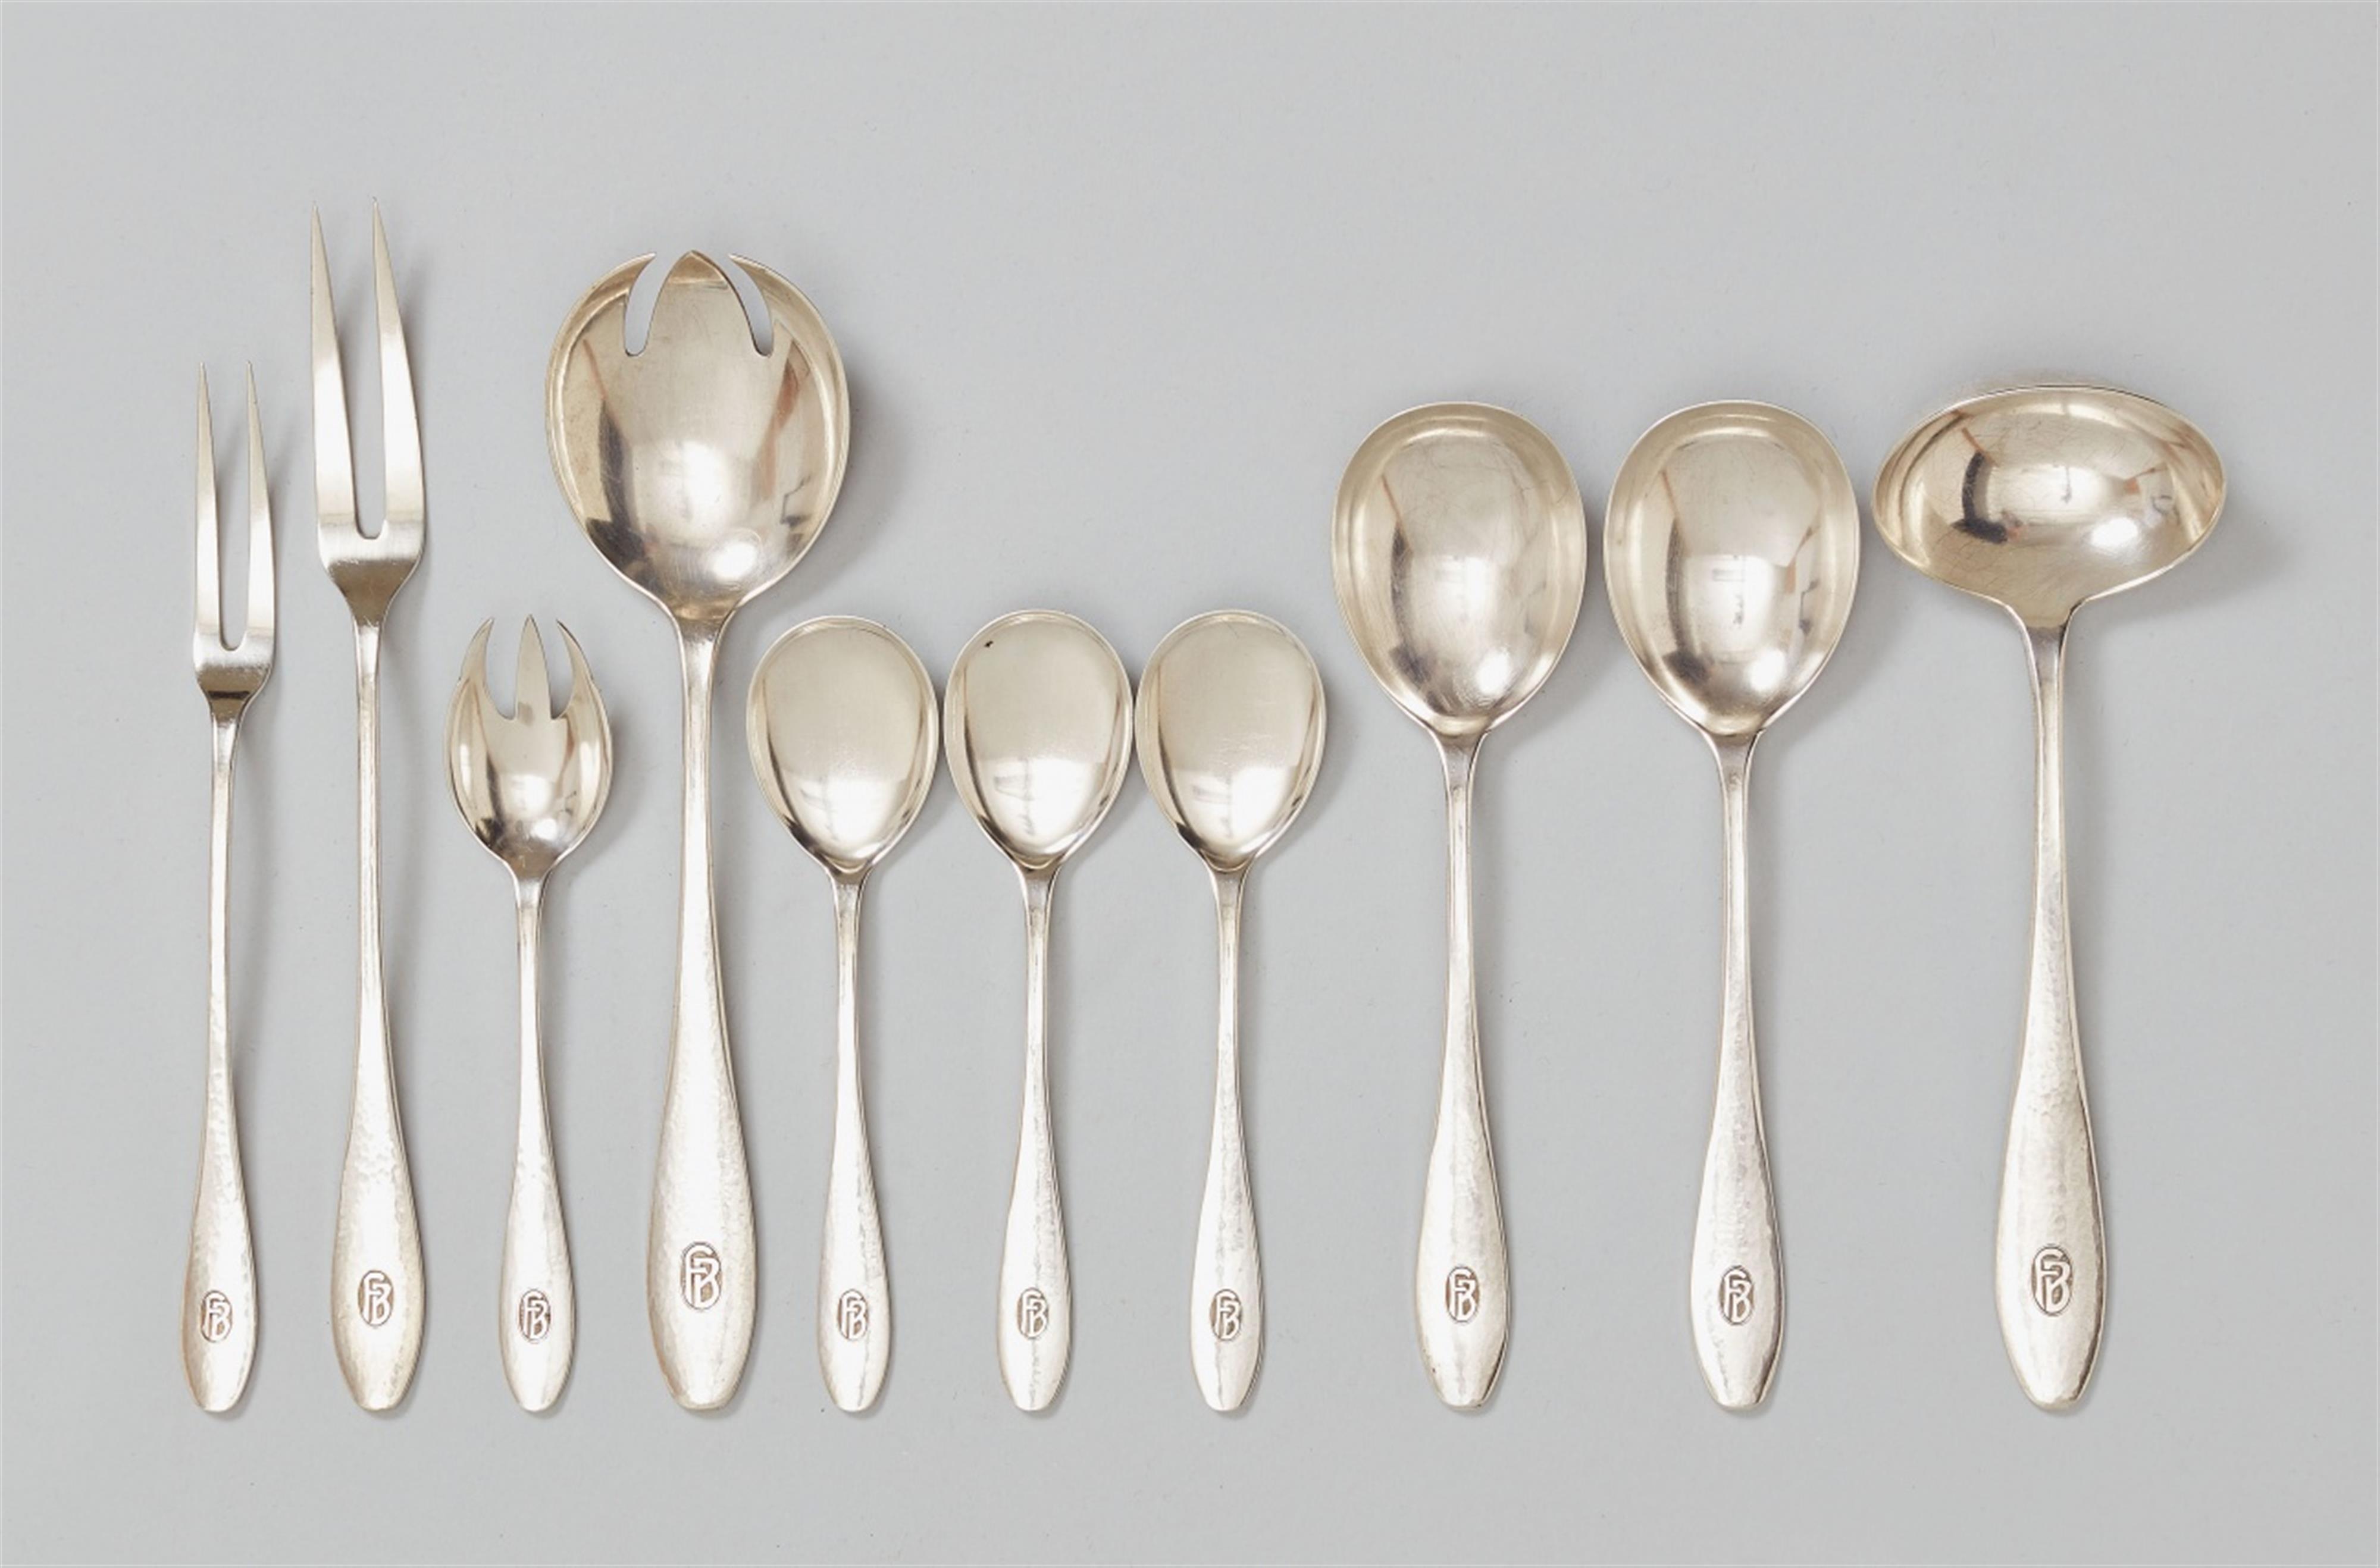 Ten jugendstil Munich silver serving pieces. Comprising five spoons, four forks and a small ladle, all pieces monogrammed "FB". Design attributed to Richard Riemerschmid 1911/12, produced by Carl Weishaupt. - image-1